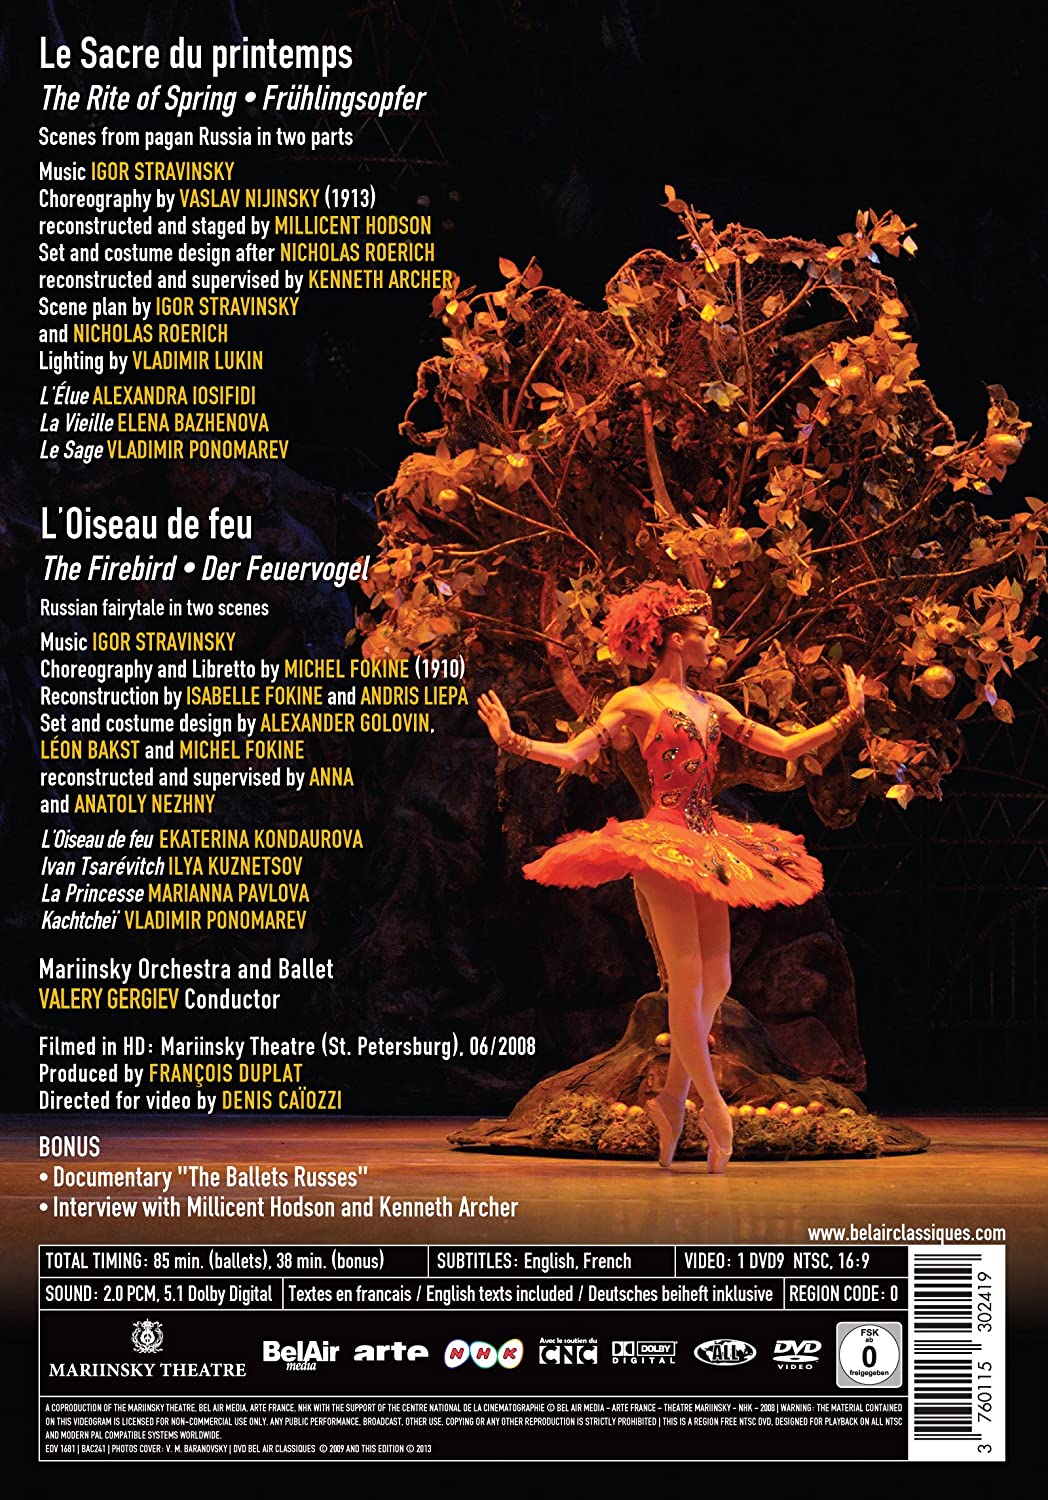 Stravinsky: Le Sacre du Printemps, The Firebird - Stravinksy and the Ballet Russes 100th Anniversary (Mariinsky Orchestra and Ballet / Valery Gergiev) BOOK [2013] [DVD]